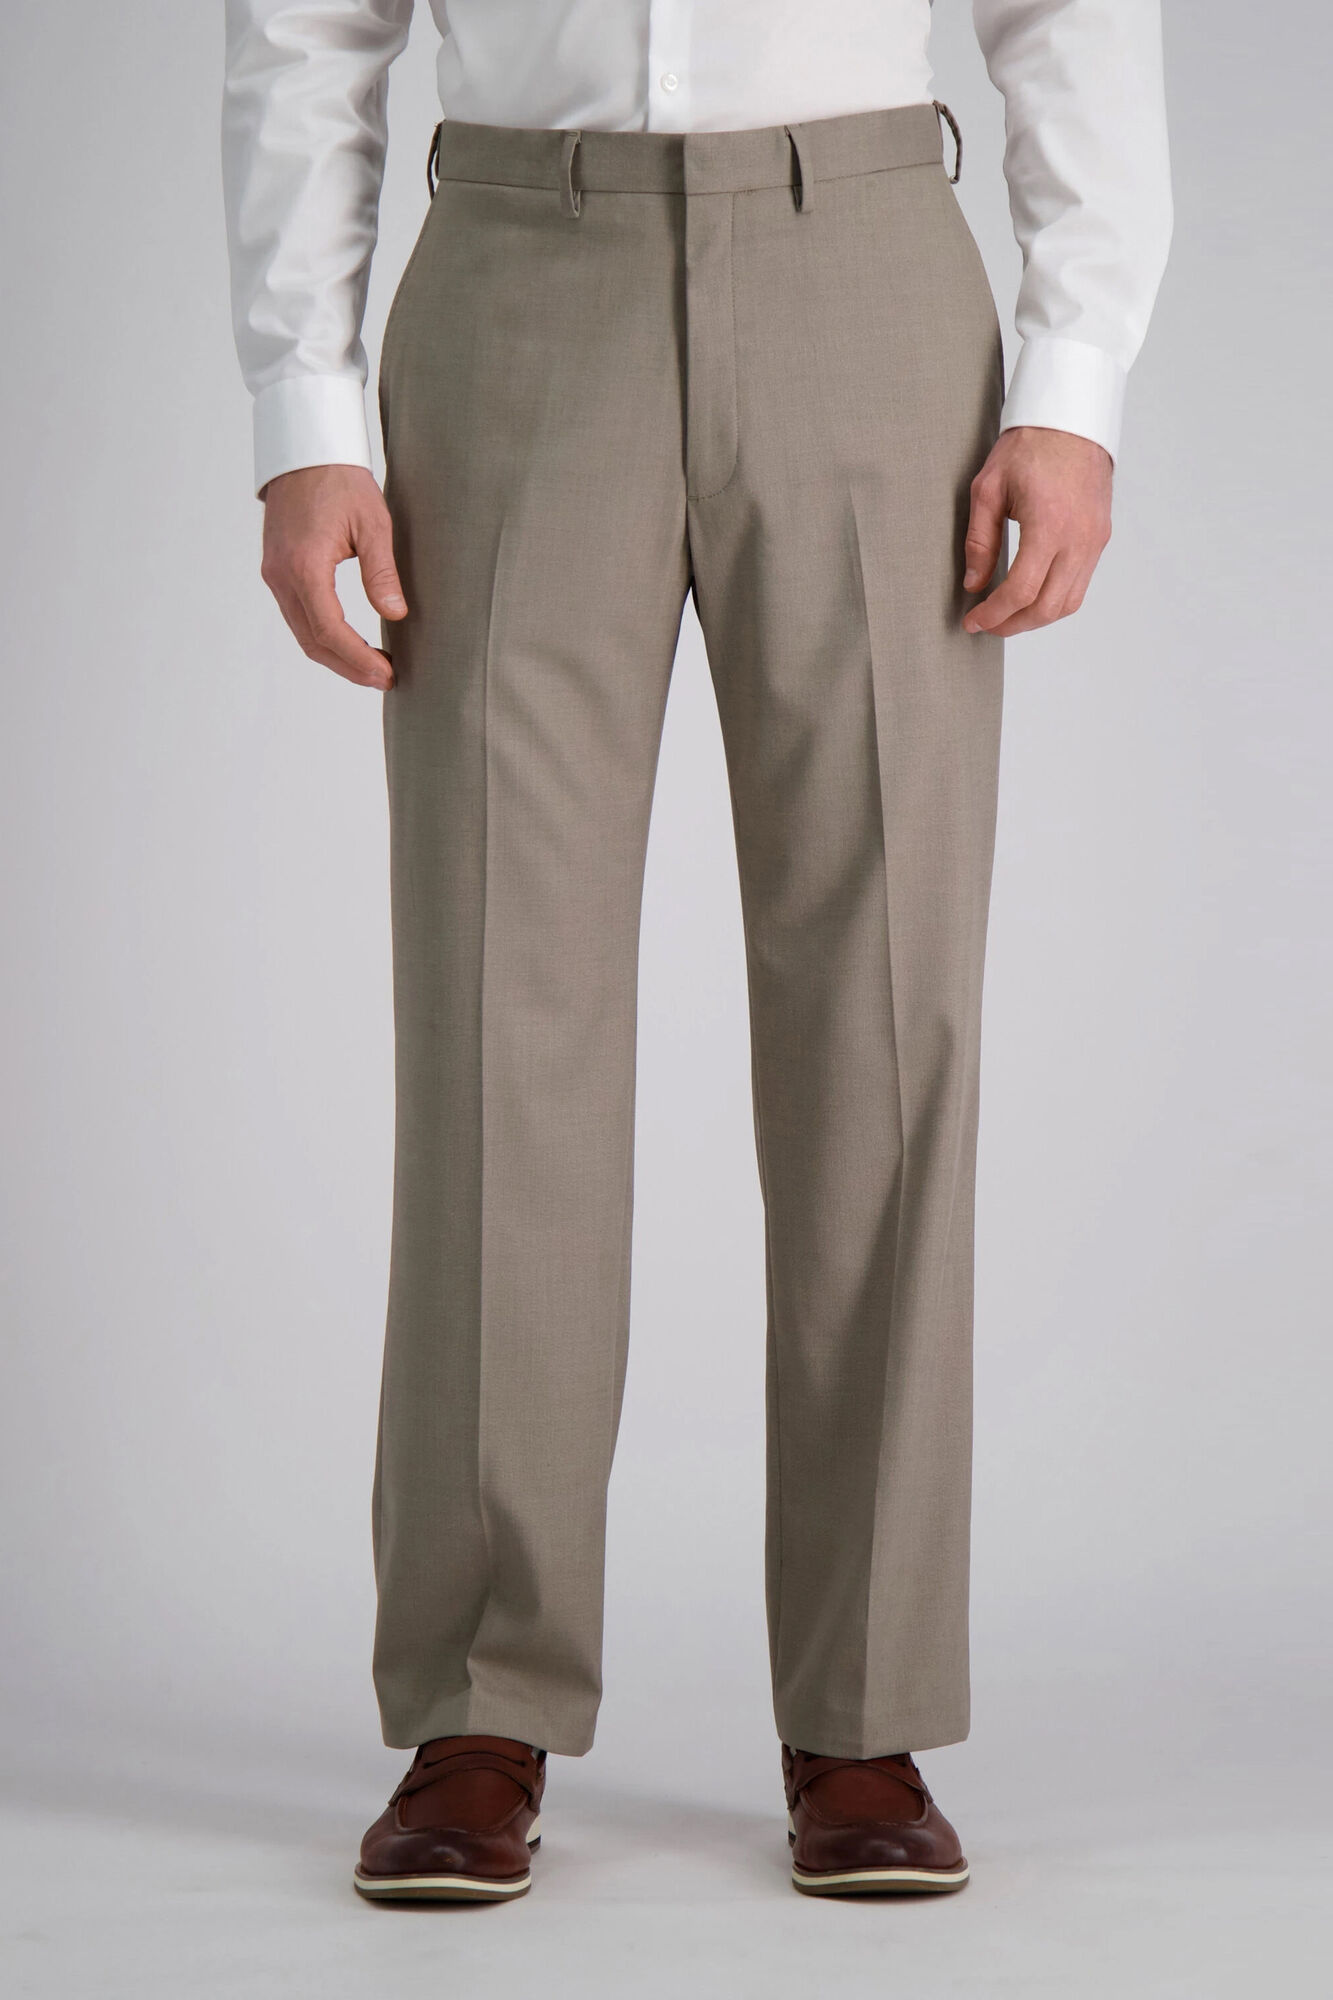 J.M. Haggar Premium Stretch Suit Pant - Flat Front Oatmeal (HY00182 Clothing Pants) photo